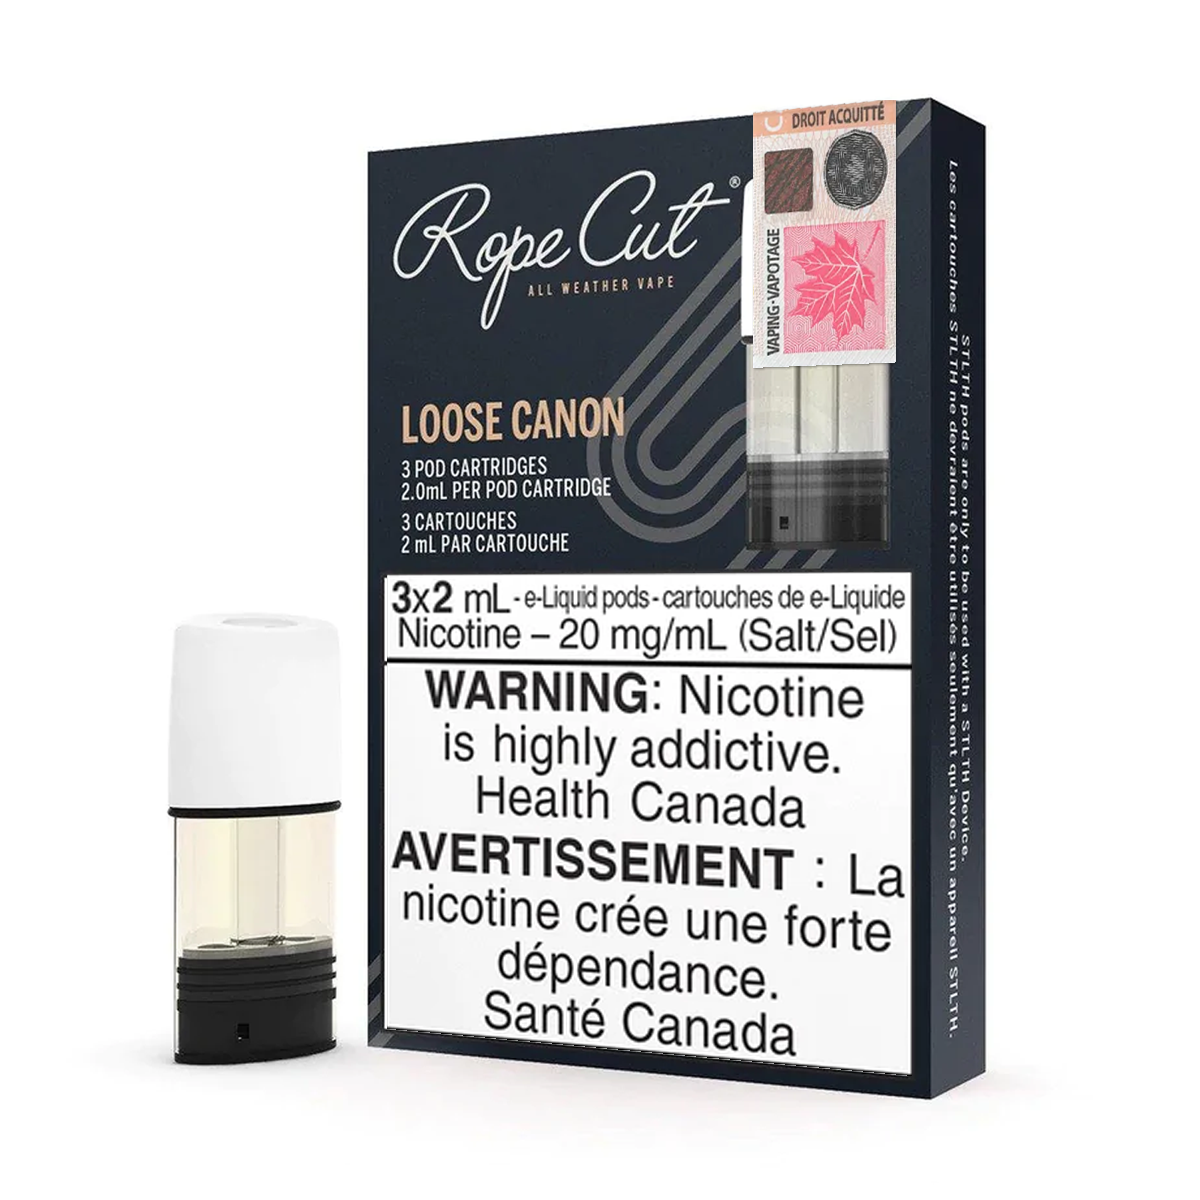 Rope Cut STLTH Pods - Loose Canon (3x2mL) (6619810267191)